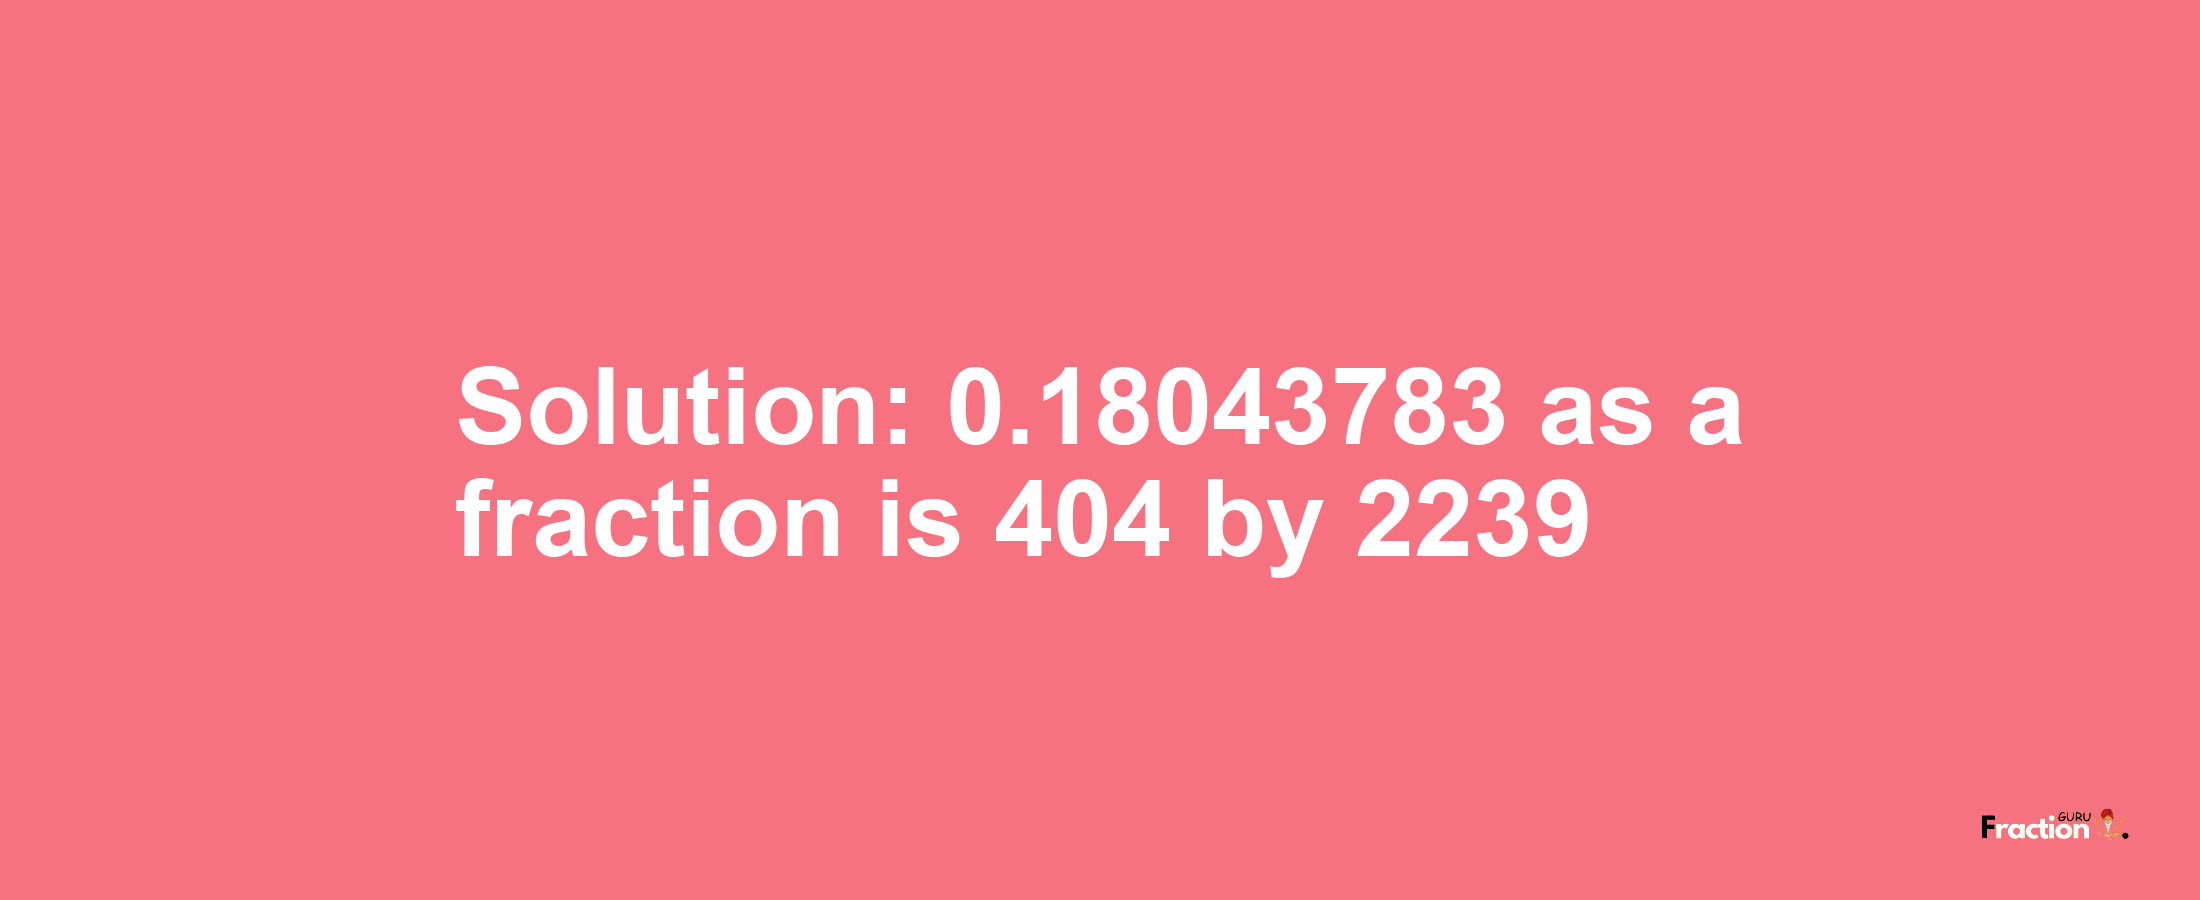 Solution:0.18043783 as a fraction is 404/2239